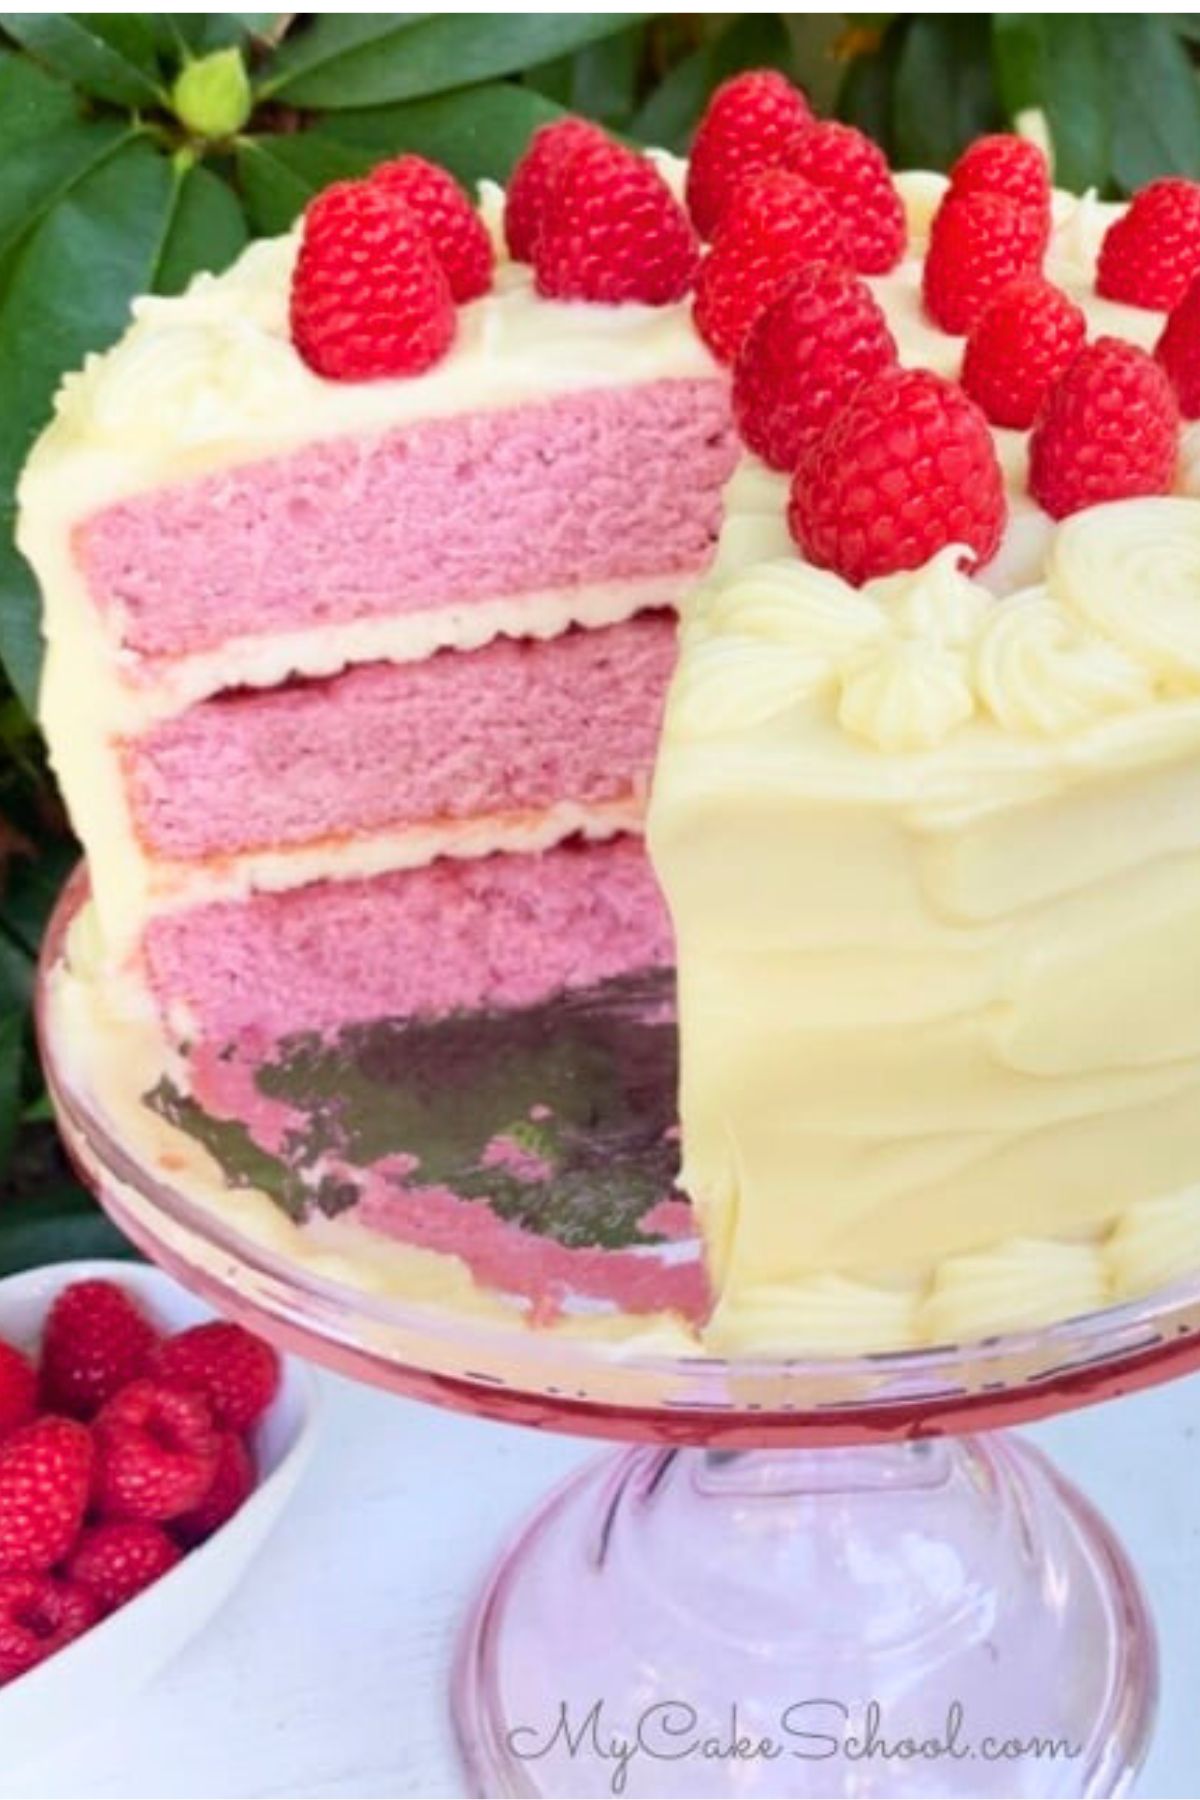 Sliced Raspberry Cake on a pink glass pedestal. Cake is topped with fresh raspberries.